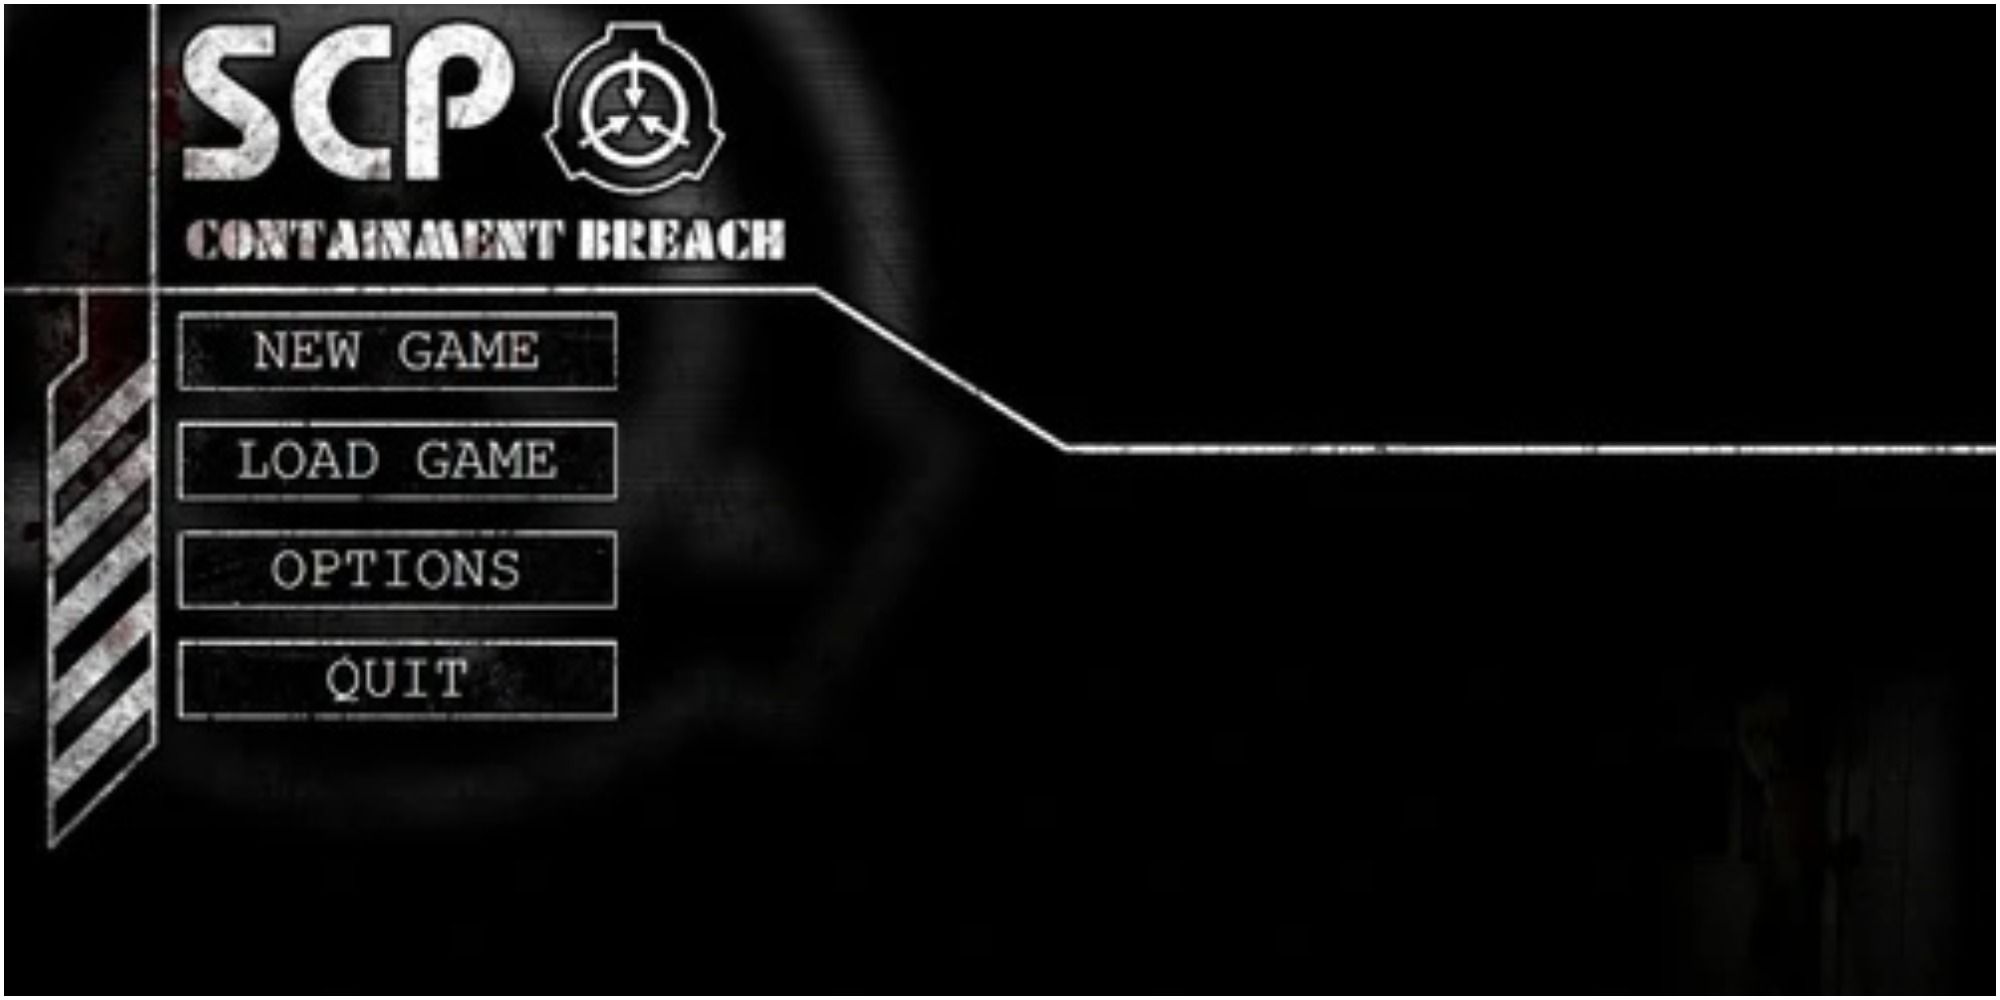 An image of the game menu for SCP Containment Breach